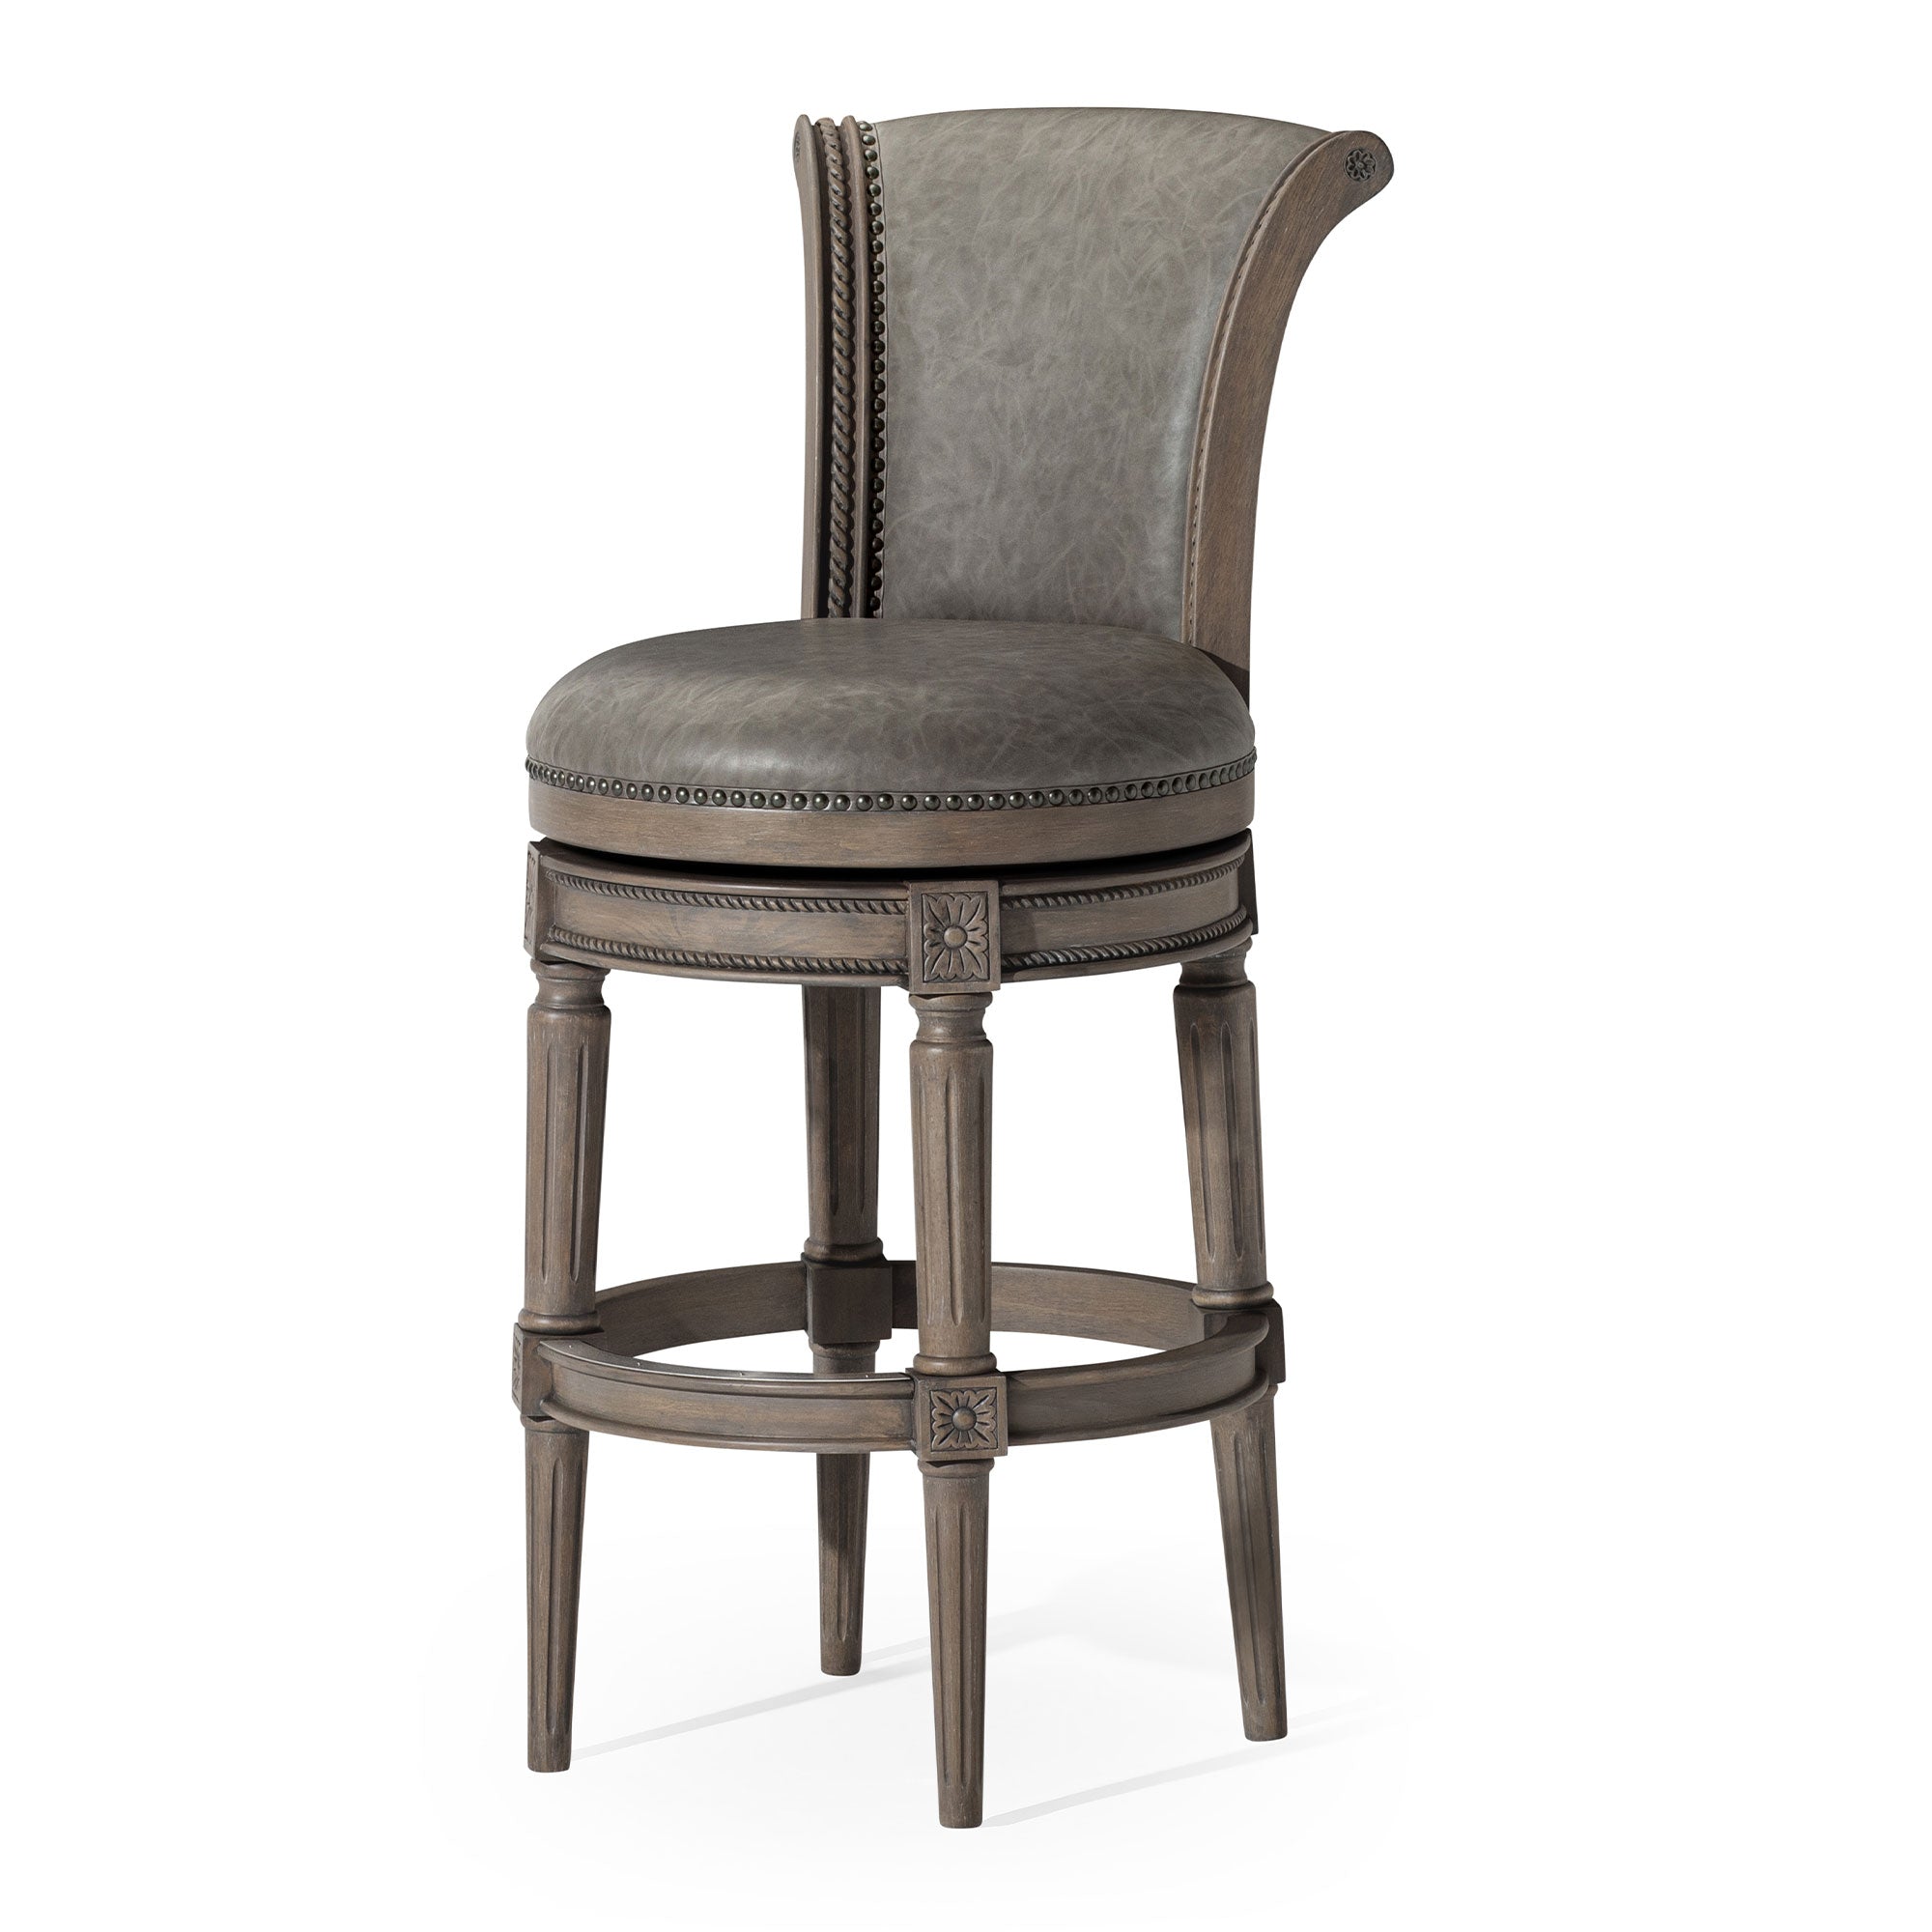 Pullman Bar Stool in Reclaimed Oak Finish with Ronan Stone Vegan Leather in Stools by Maven Lane